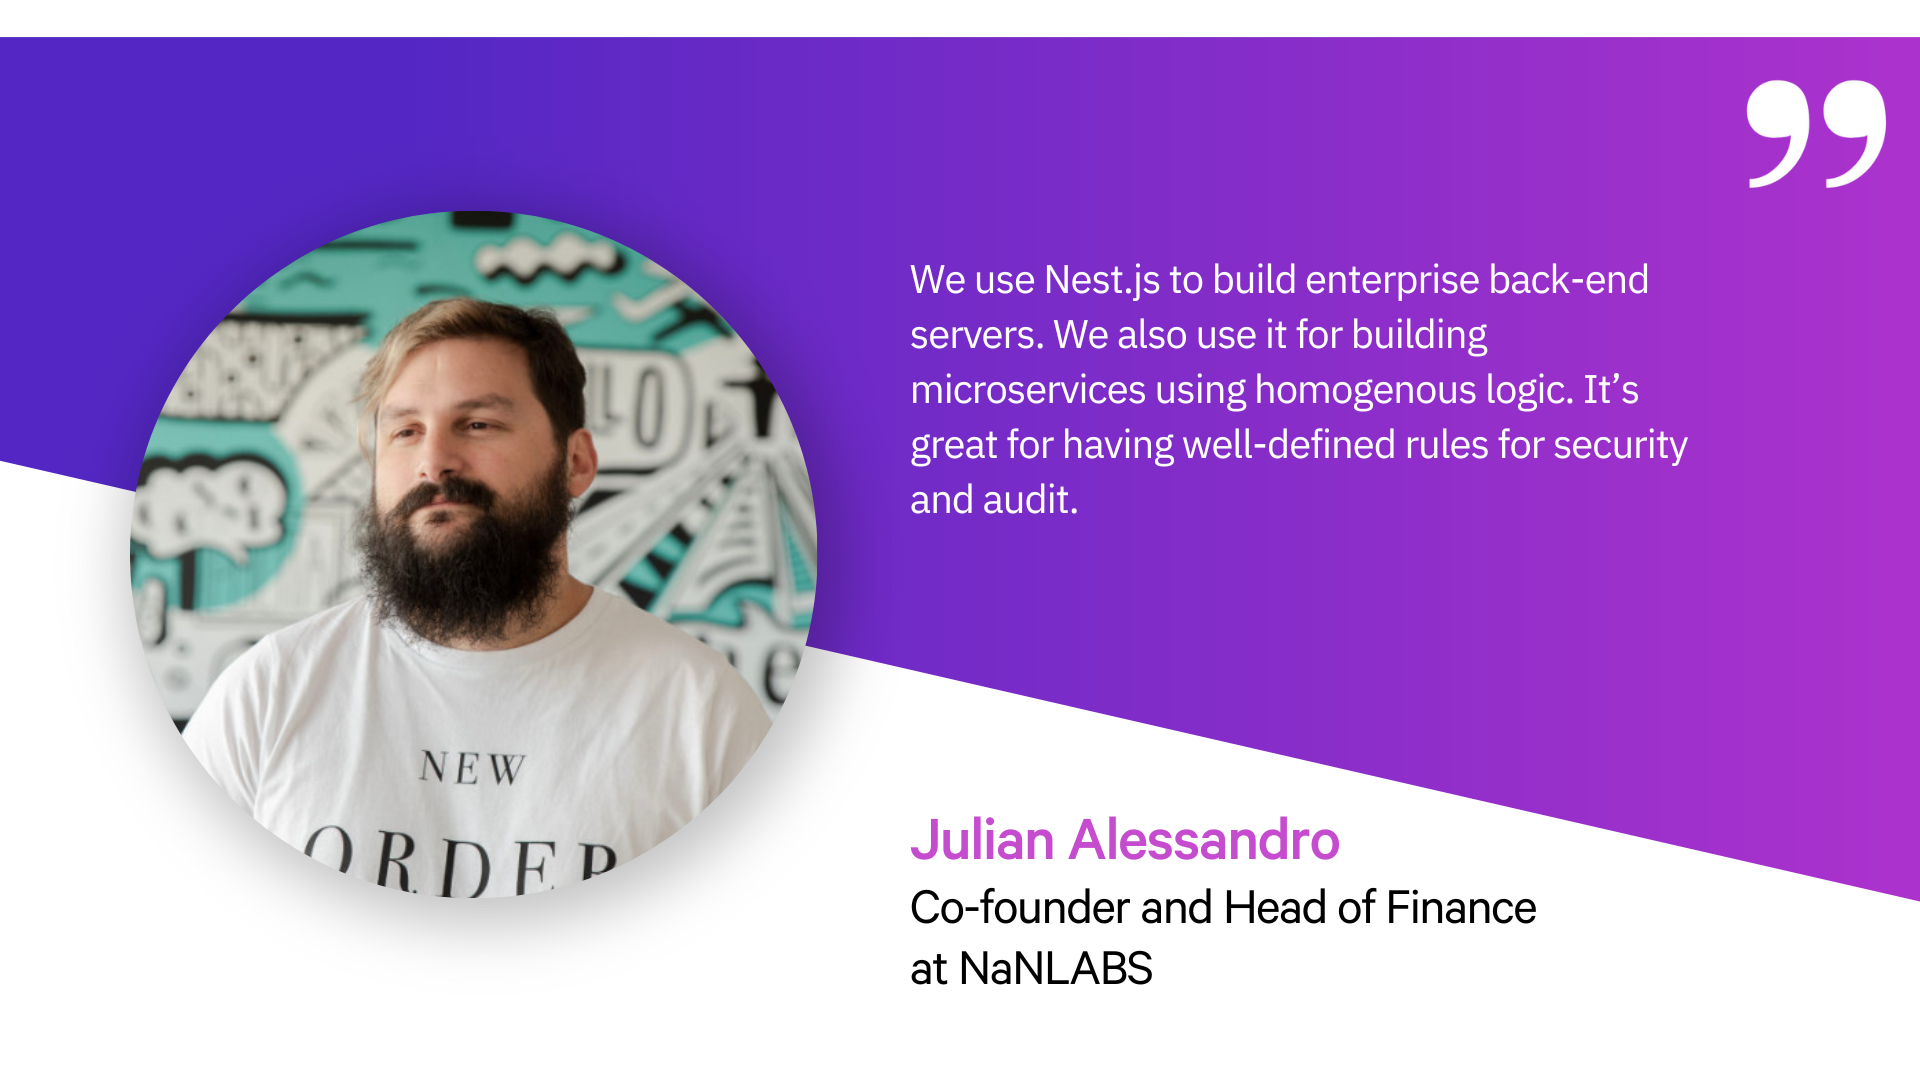 Quote by NaNLABS co-founder on Nest.js Node.js web framework